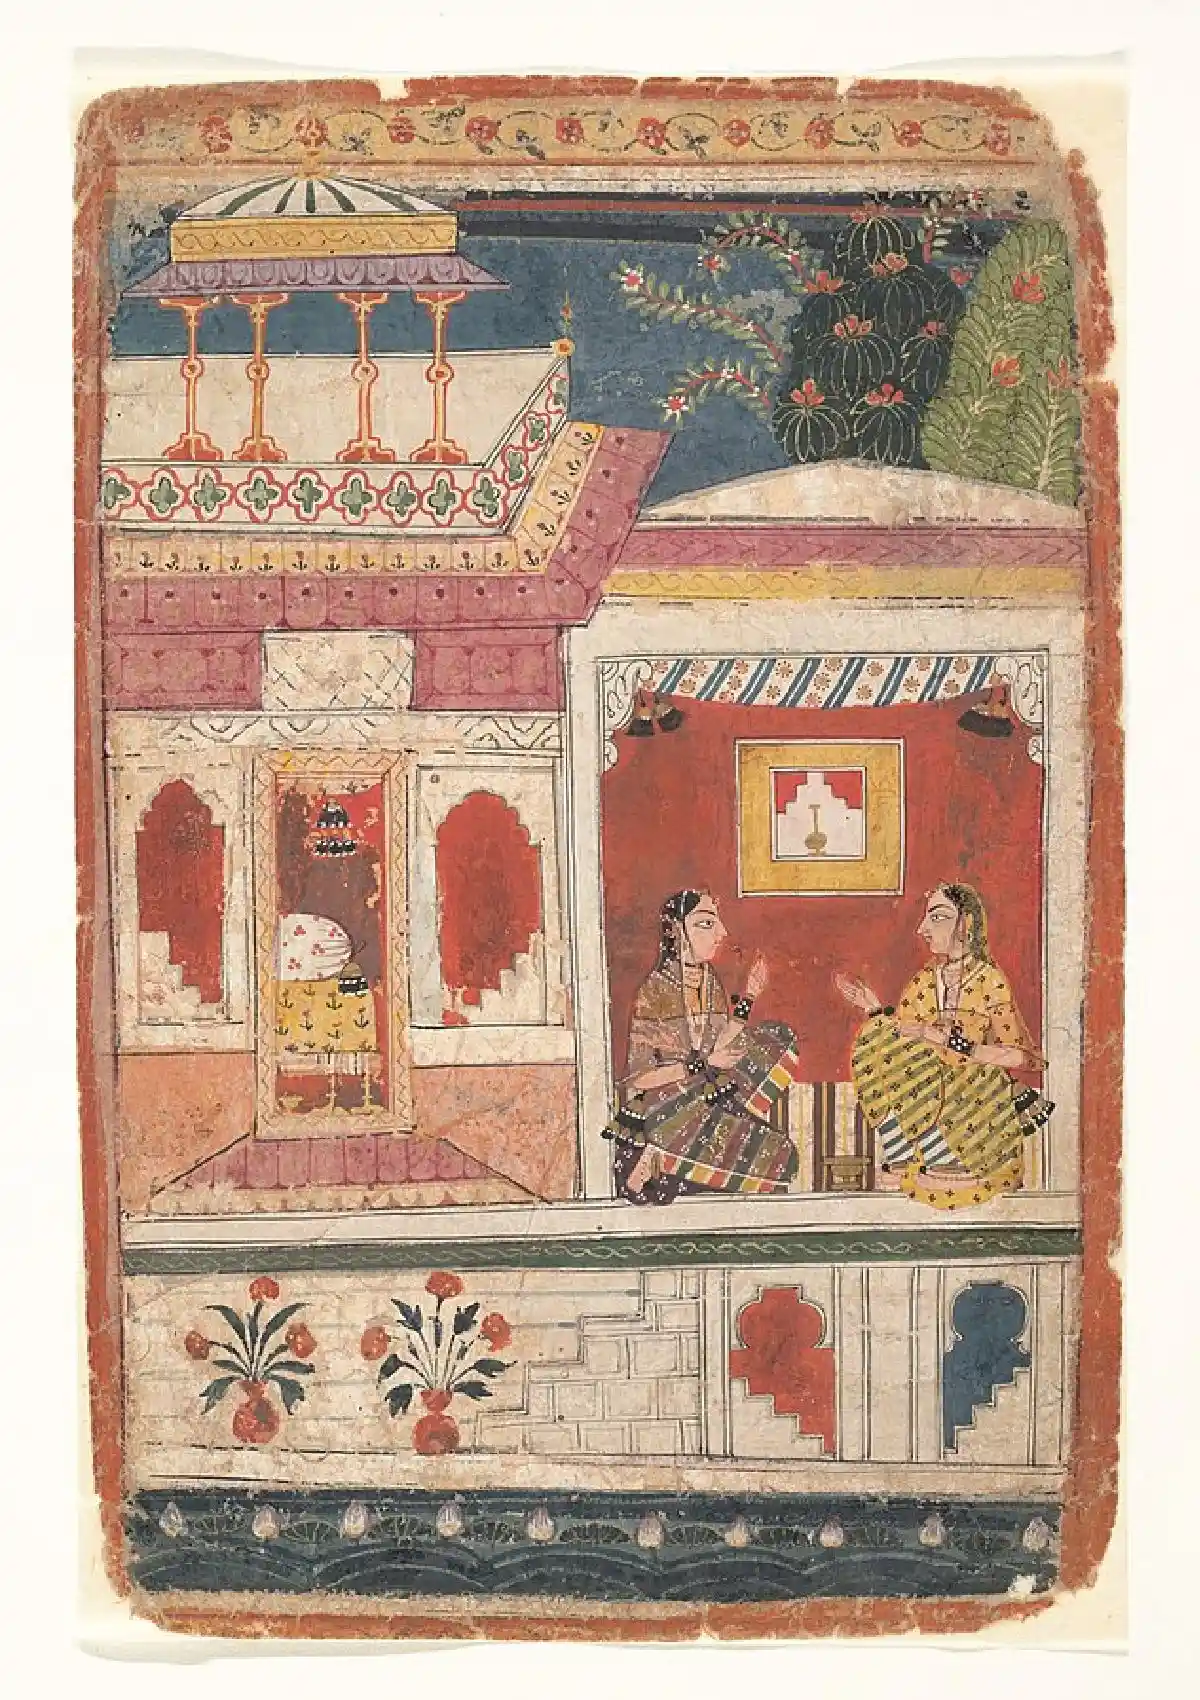 Radha and Her Confidant Sit in an Open Room Source: Wikimedia Commons